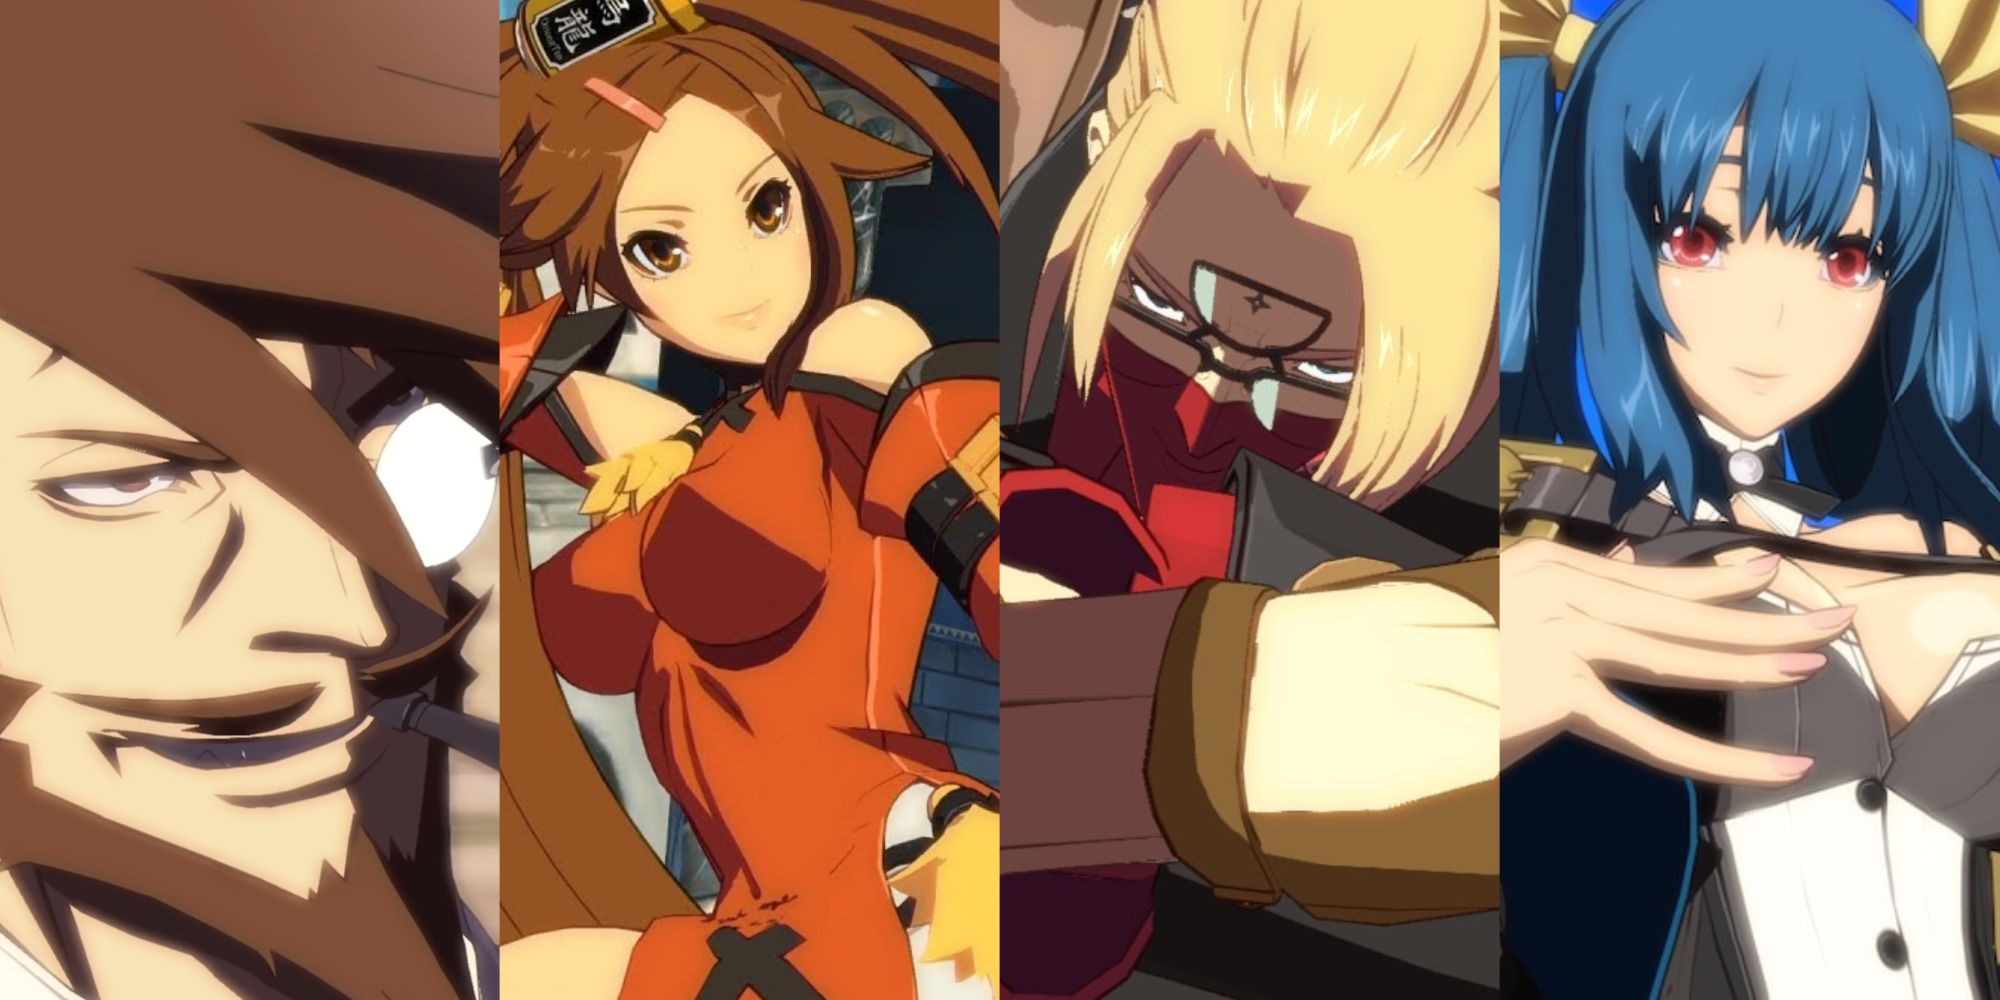 A collage showing four characters: Slayer, Jam, Answer, and Dizzy.